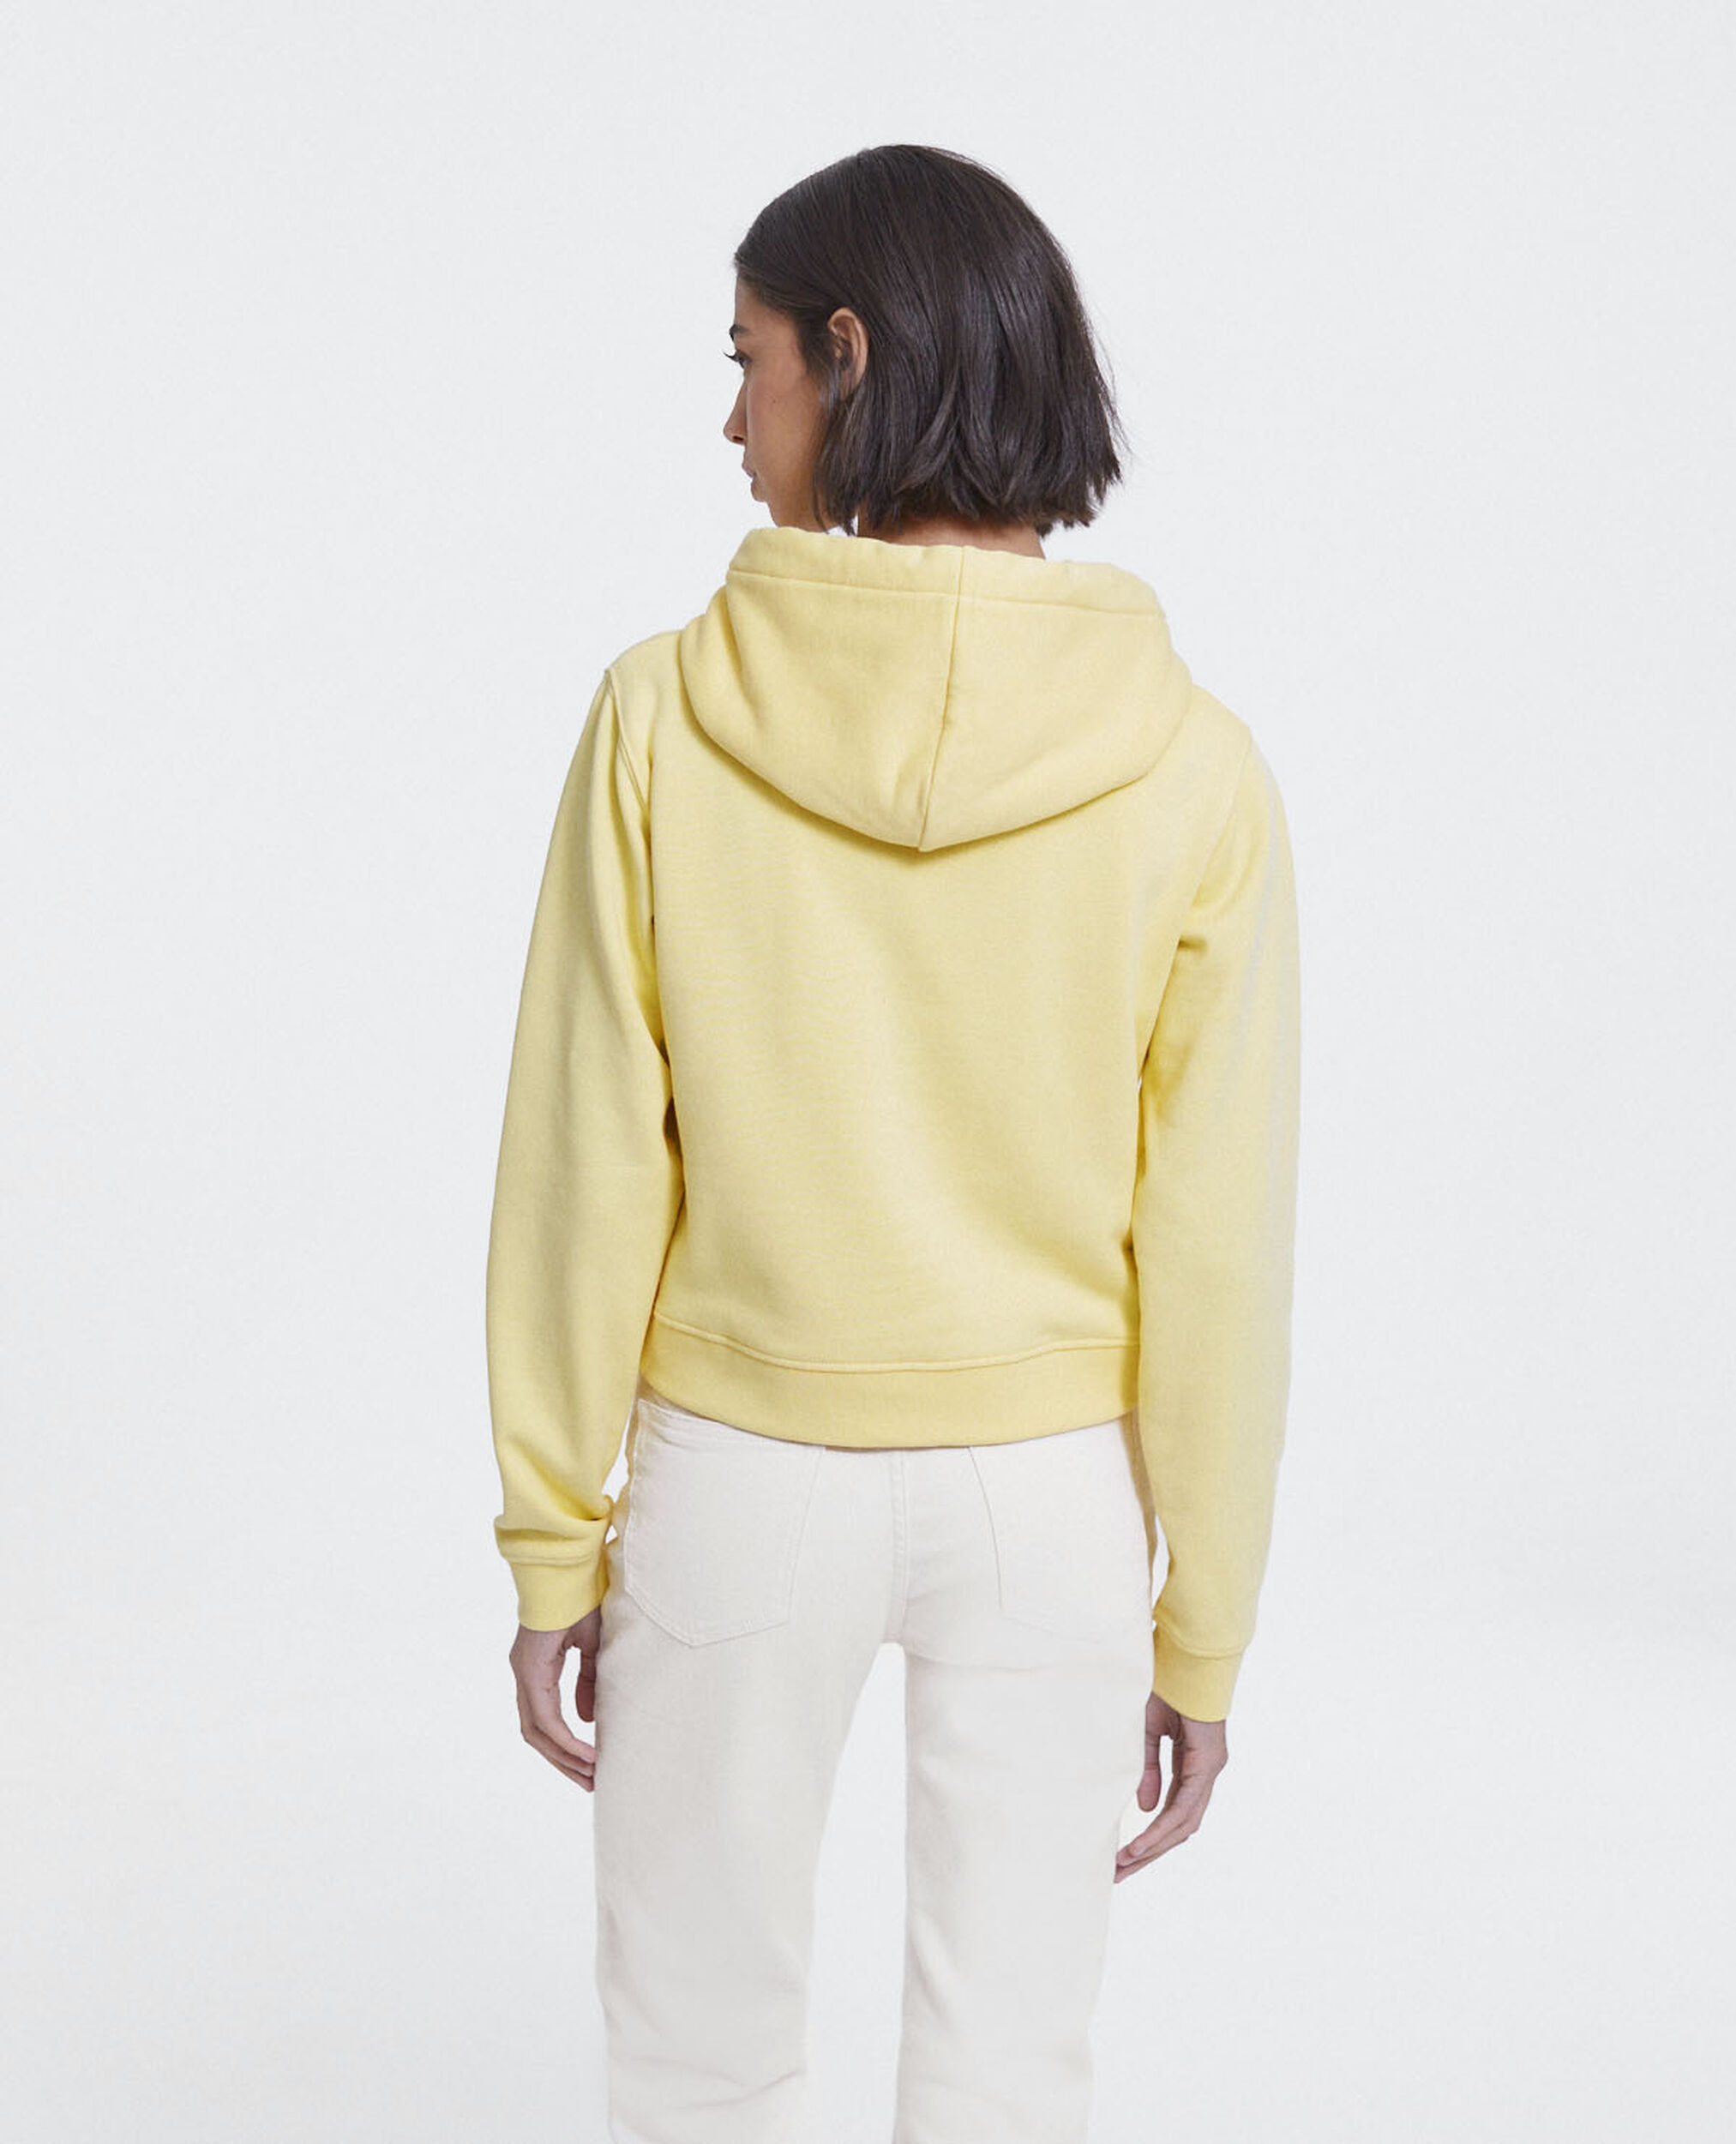 Sweat jaune capuche triple logo The Kooples, YELLOW, hi-res image number null